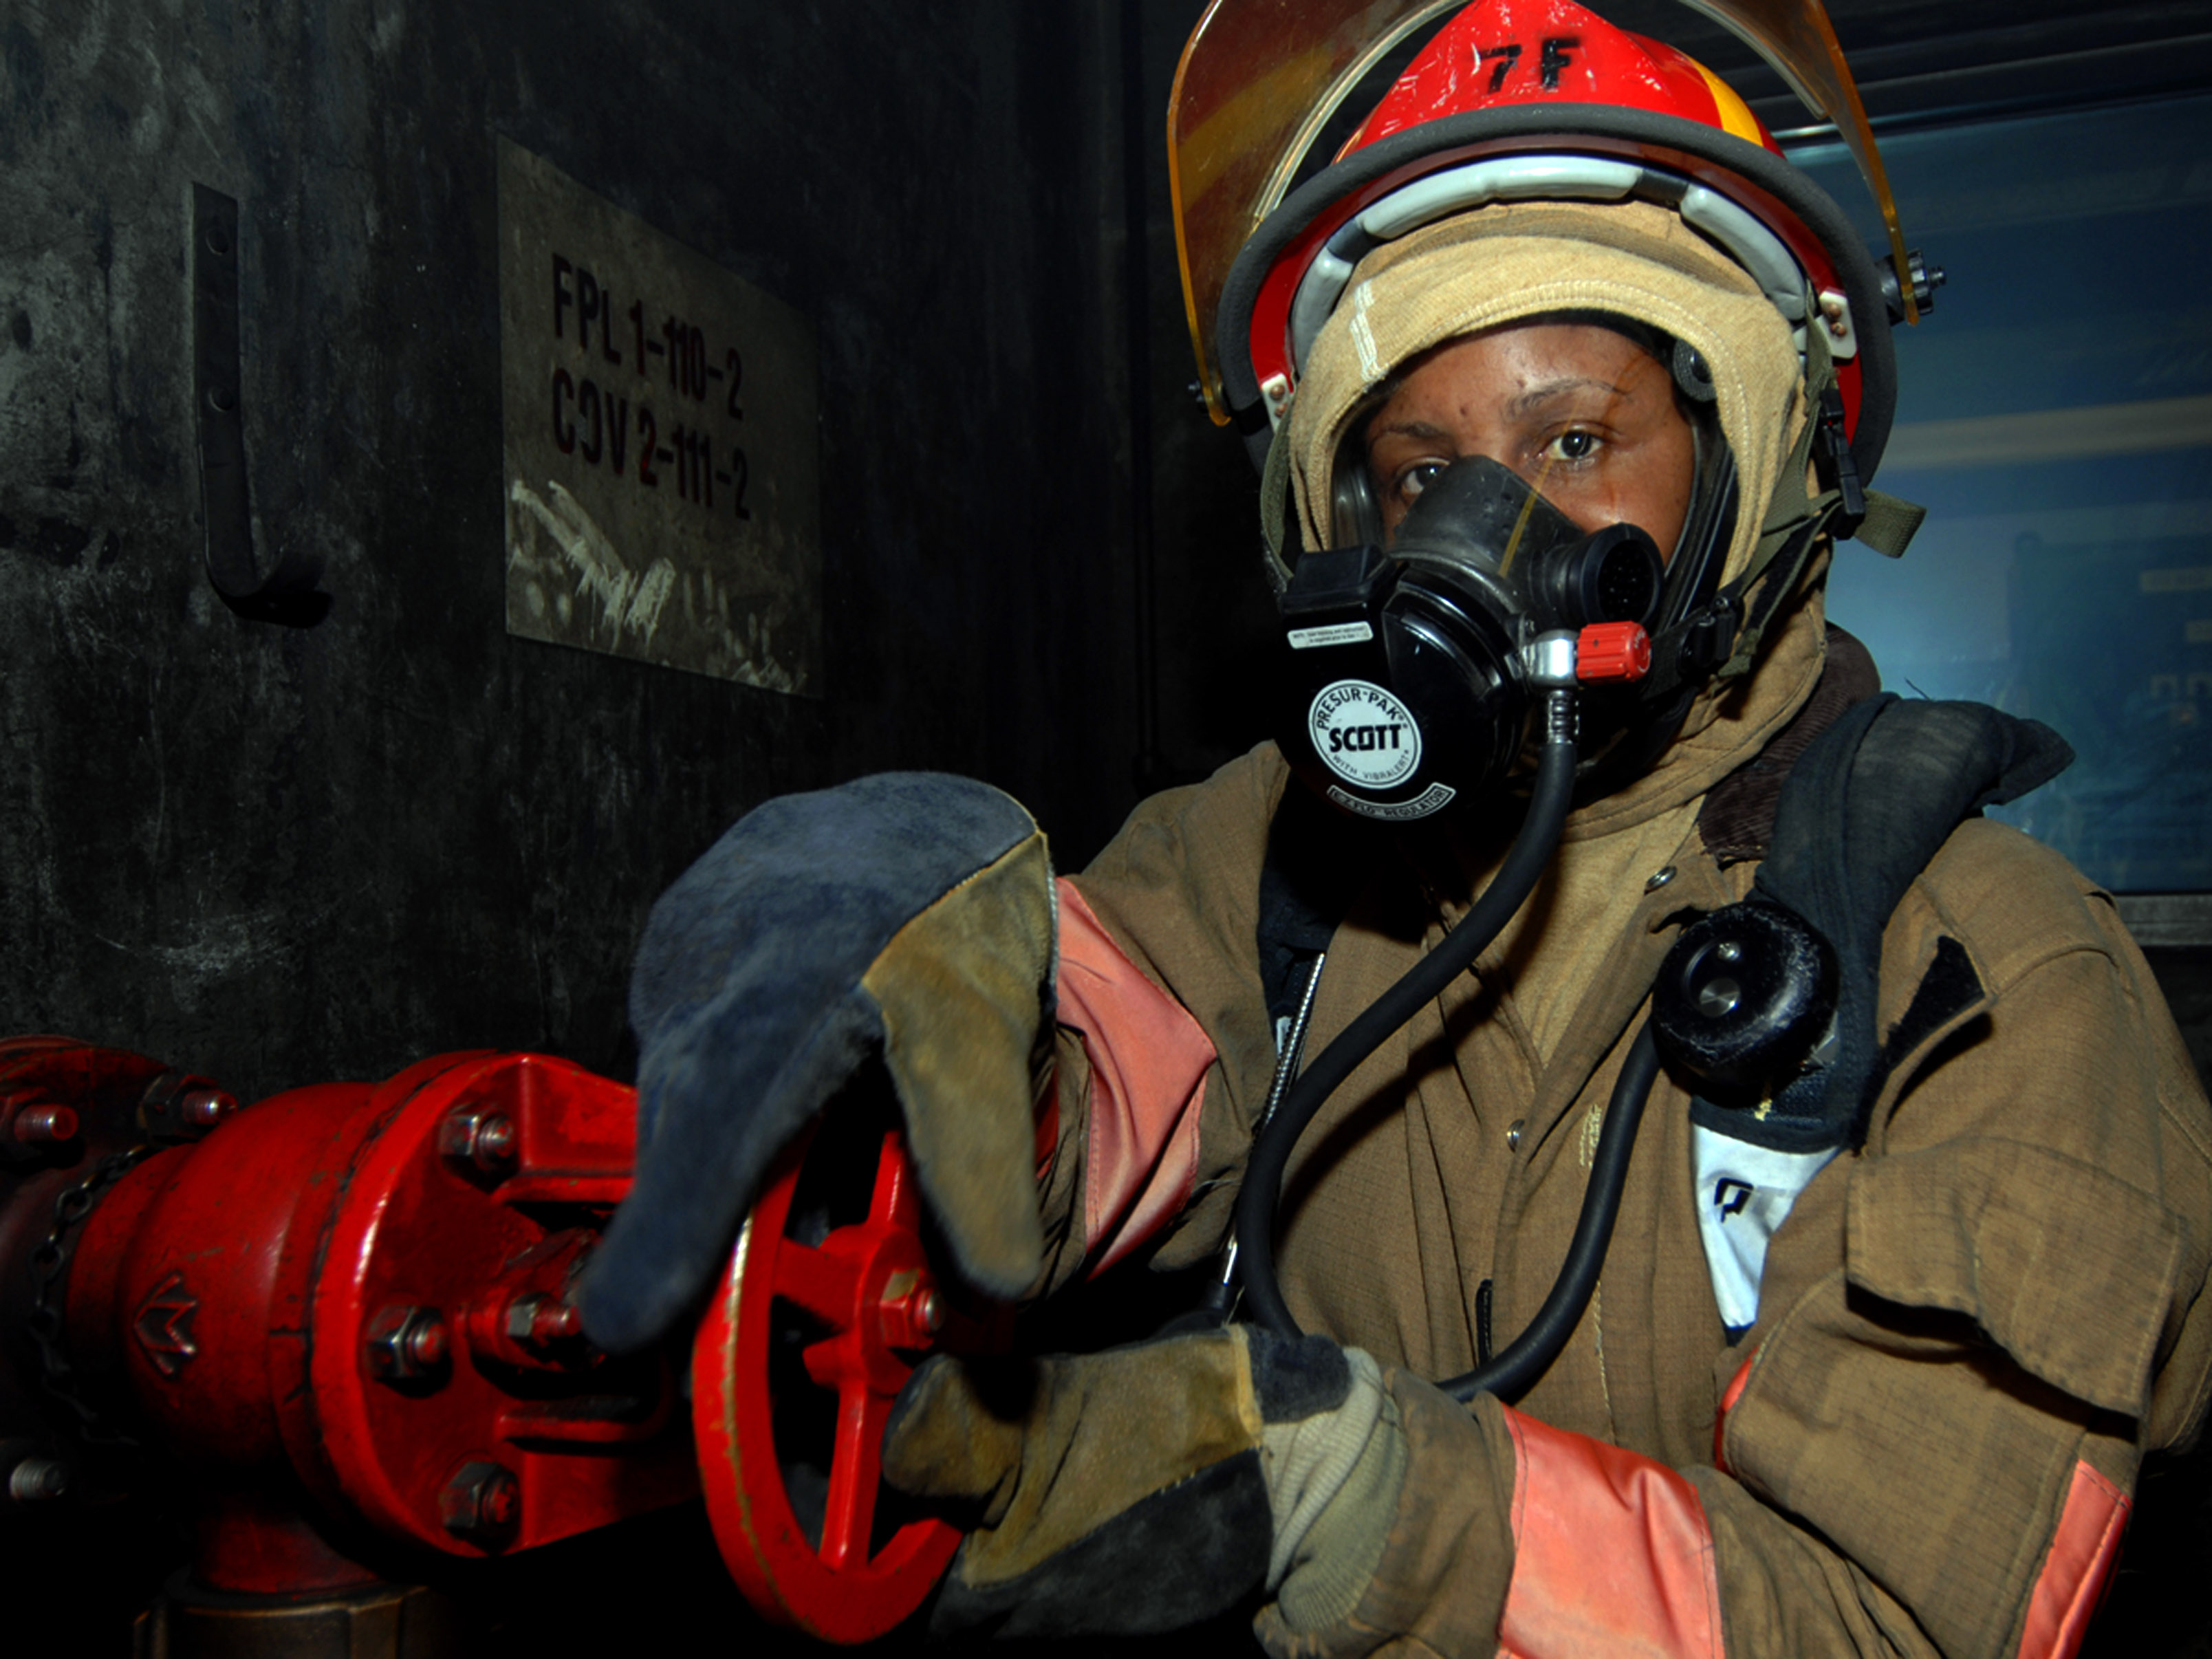 US Navy 070627-N-4868G-166 A damage controlman from USS Harry S. Truman (CVN 75) participates in an event at the 5th Annual Damage Control (DC) Olympics at the Farrier Firefighting School